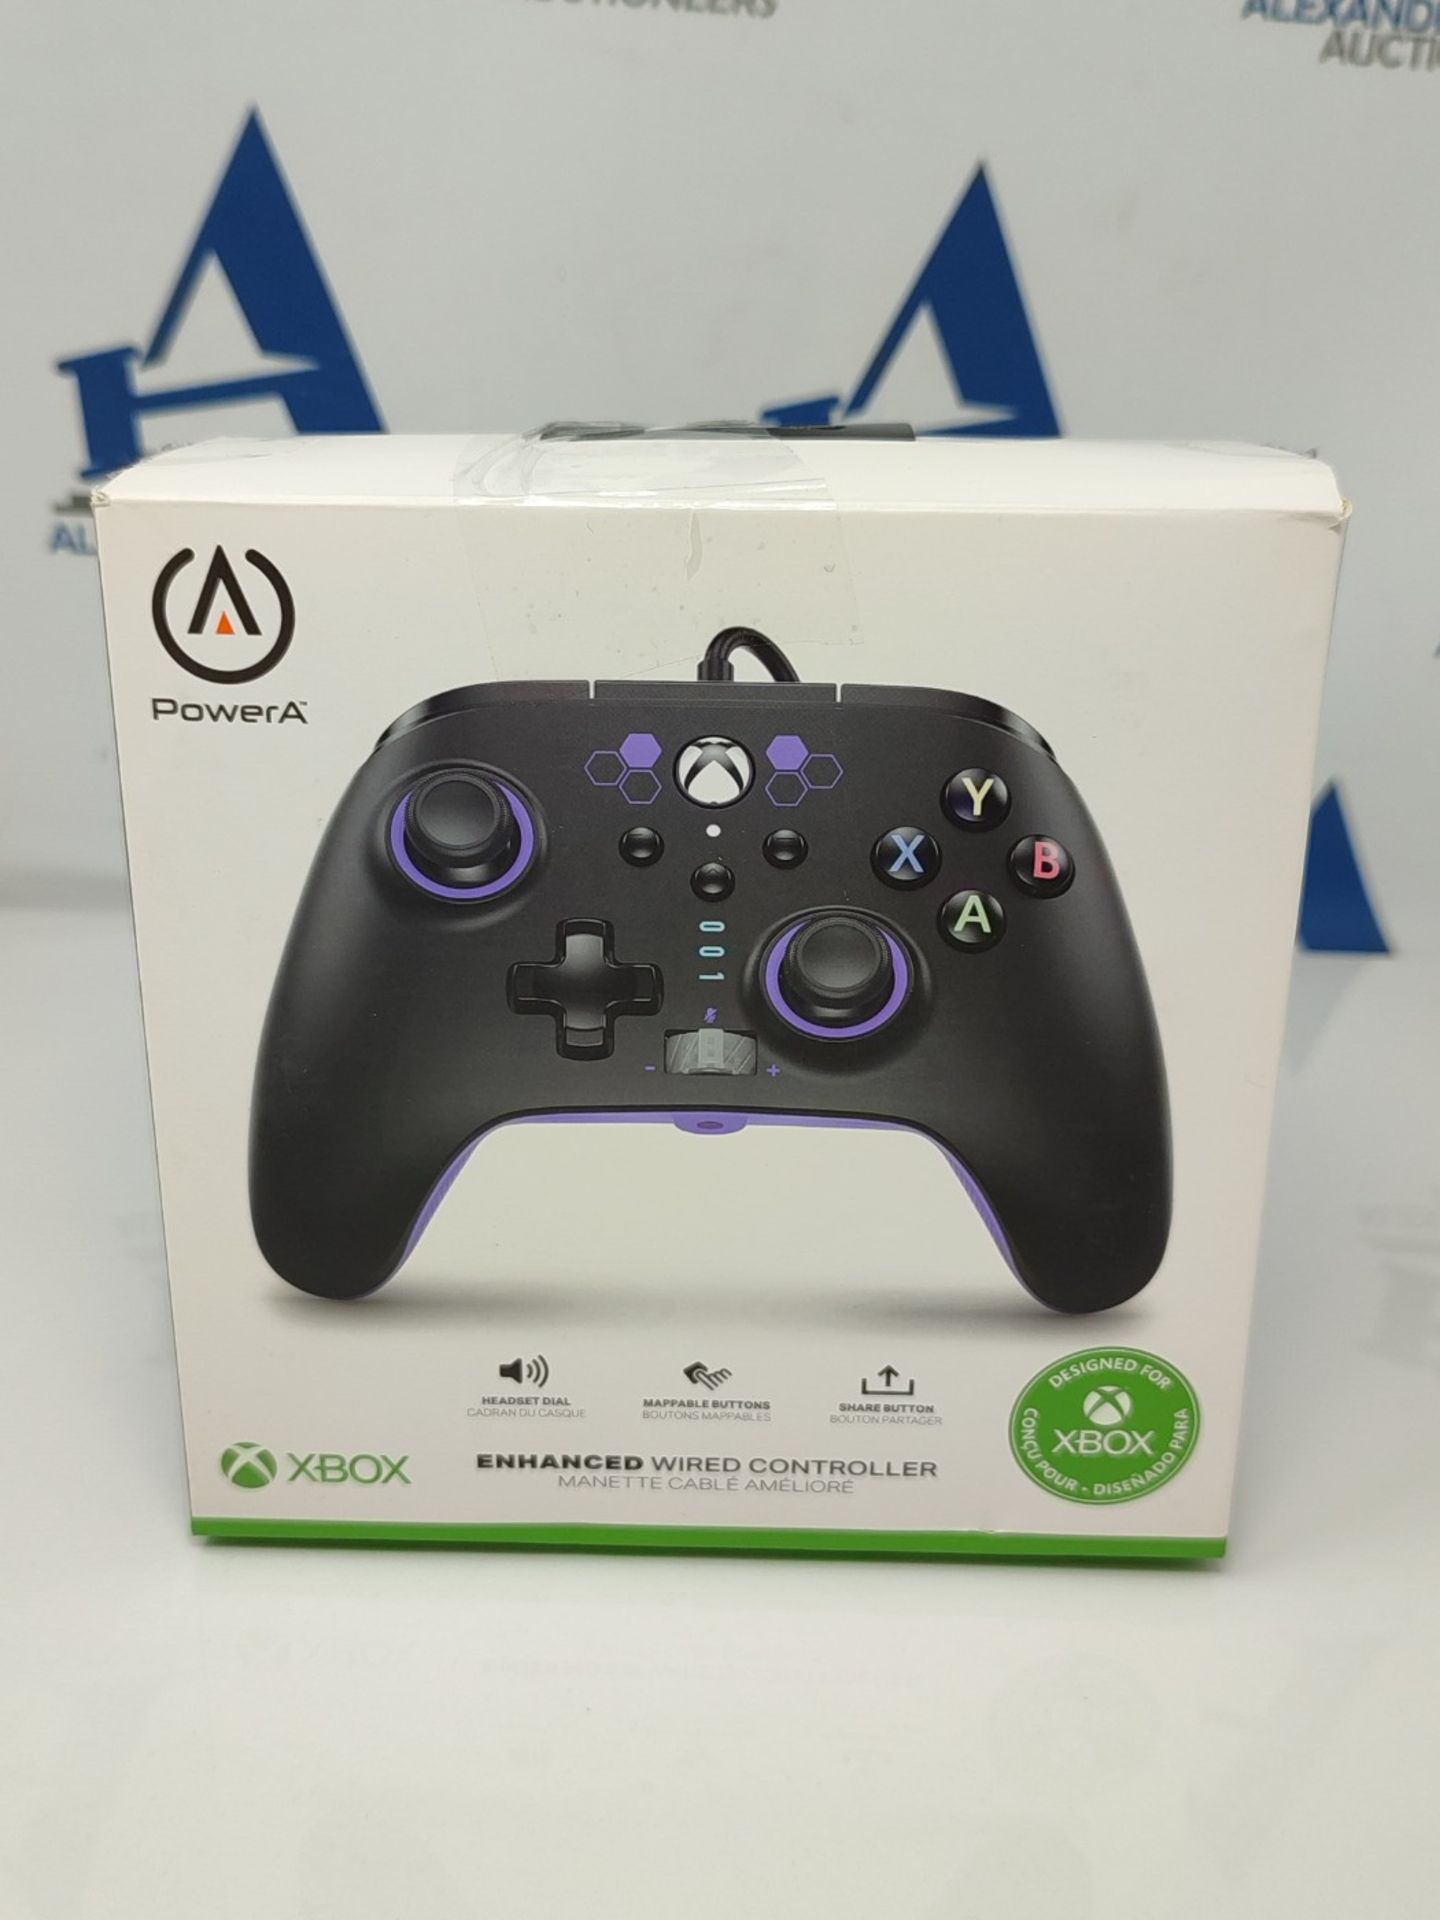 Enhanced wired PowerA controller for Xbox Series X|S - Hex Purple - Image 2 of 6